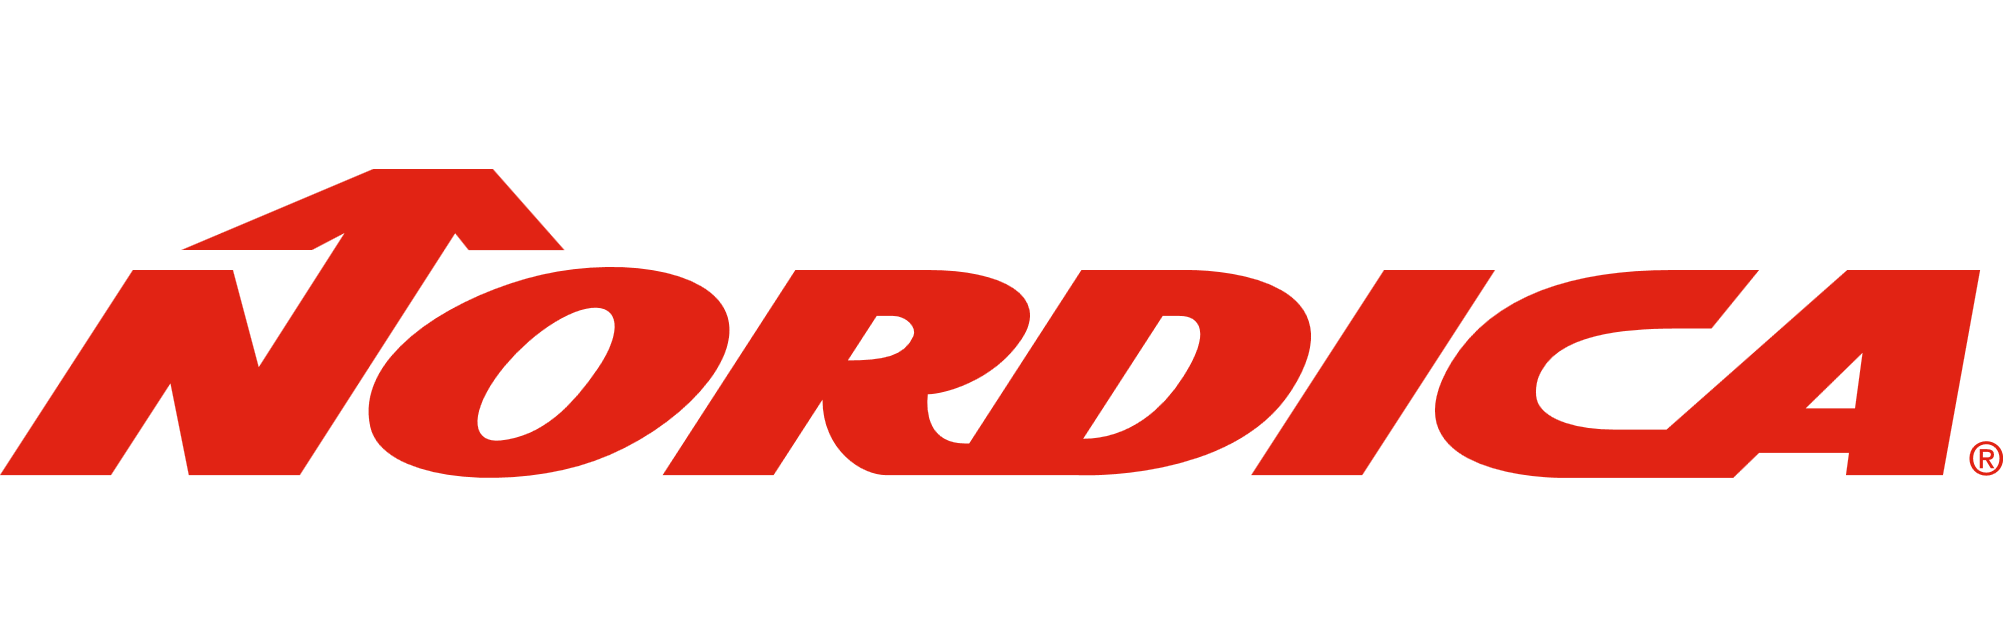 The Nordica logo reads "Nordica" in red, italic font. A peak or arrow rises out of the upstroke on the N.